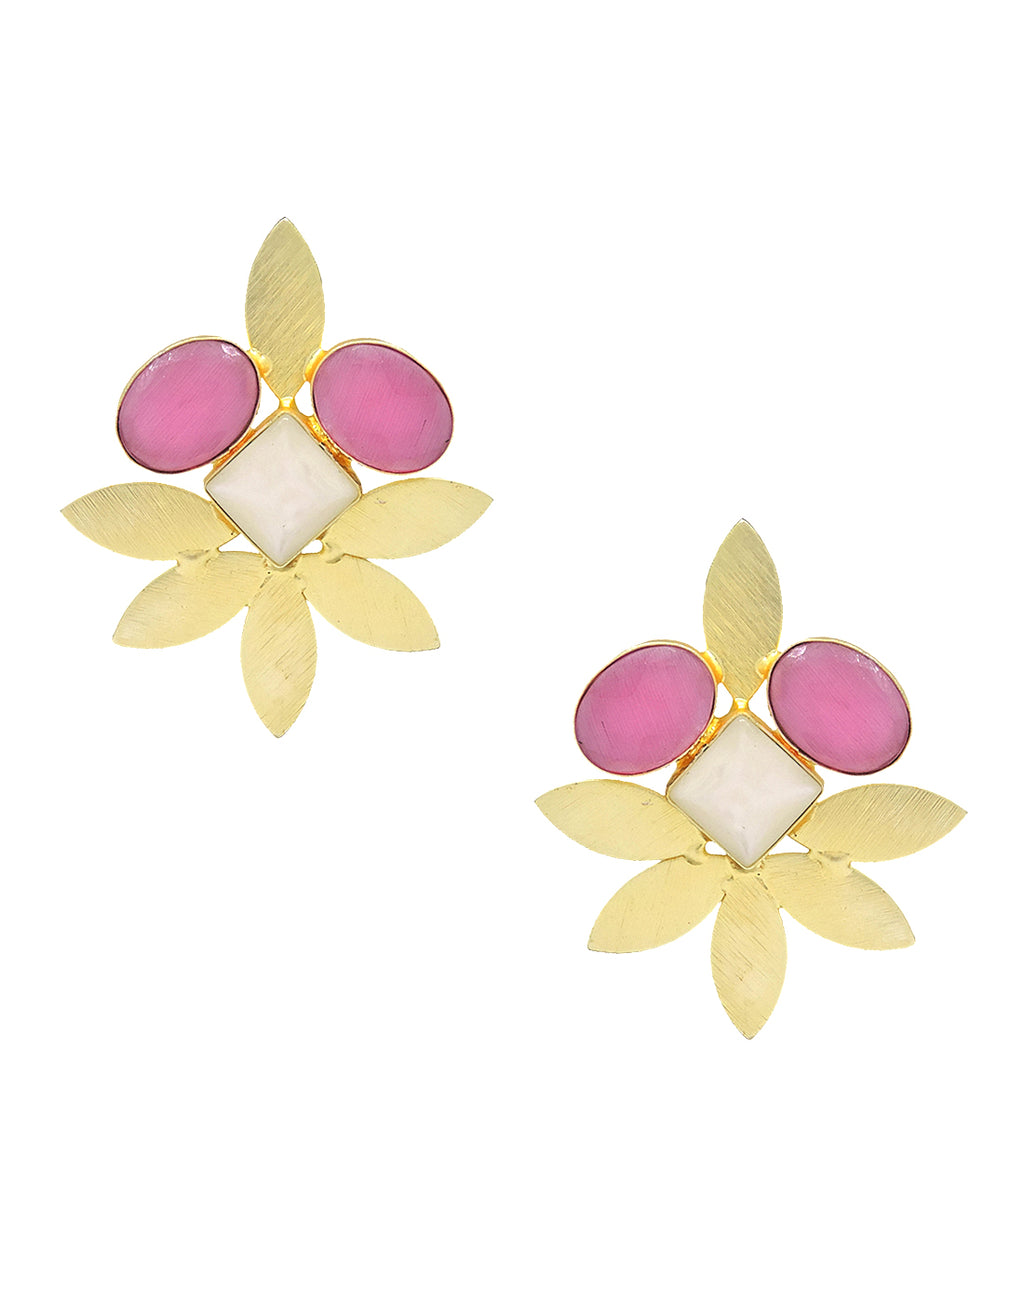 Gold Leaf Earrings - Statement Earrings - Gold-Plated & Hypoallergenic - Made in India - Dubai Jewellery - Dori